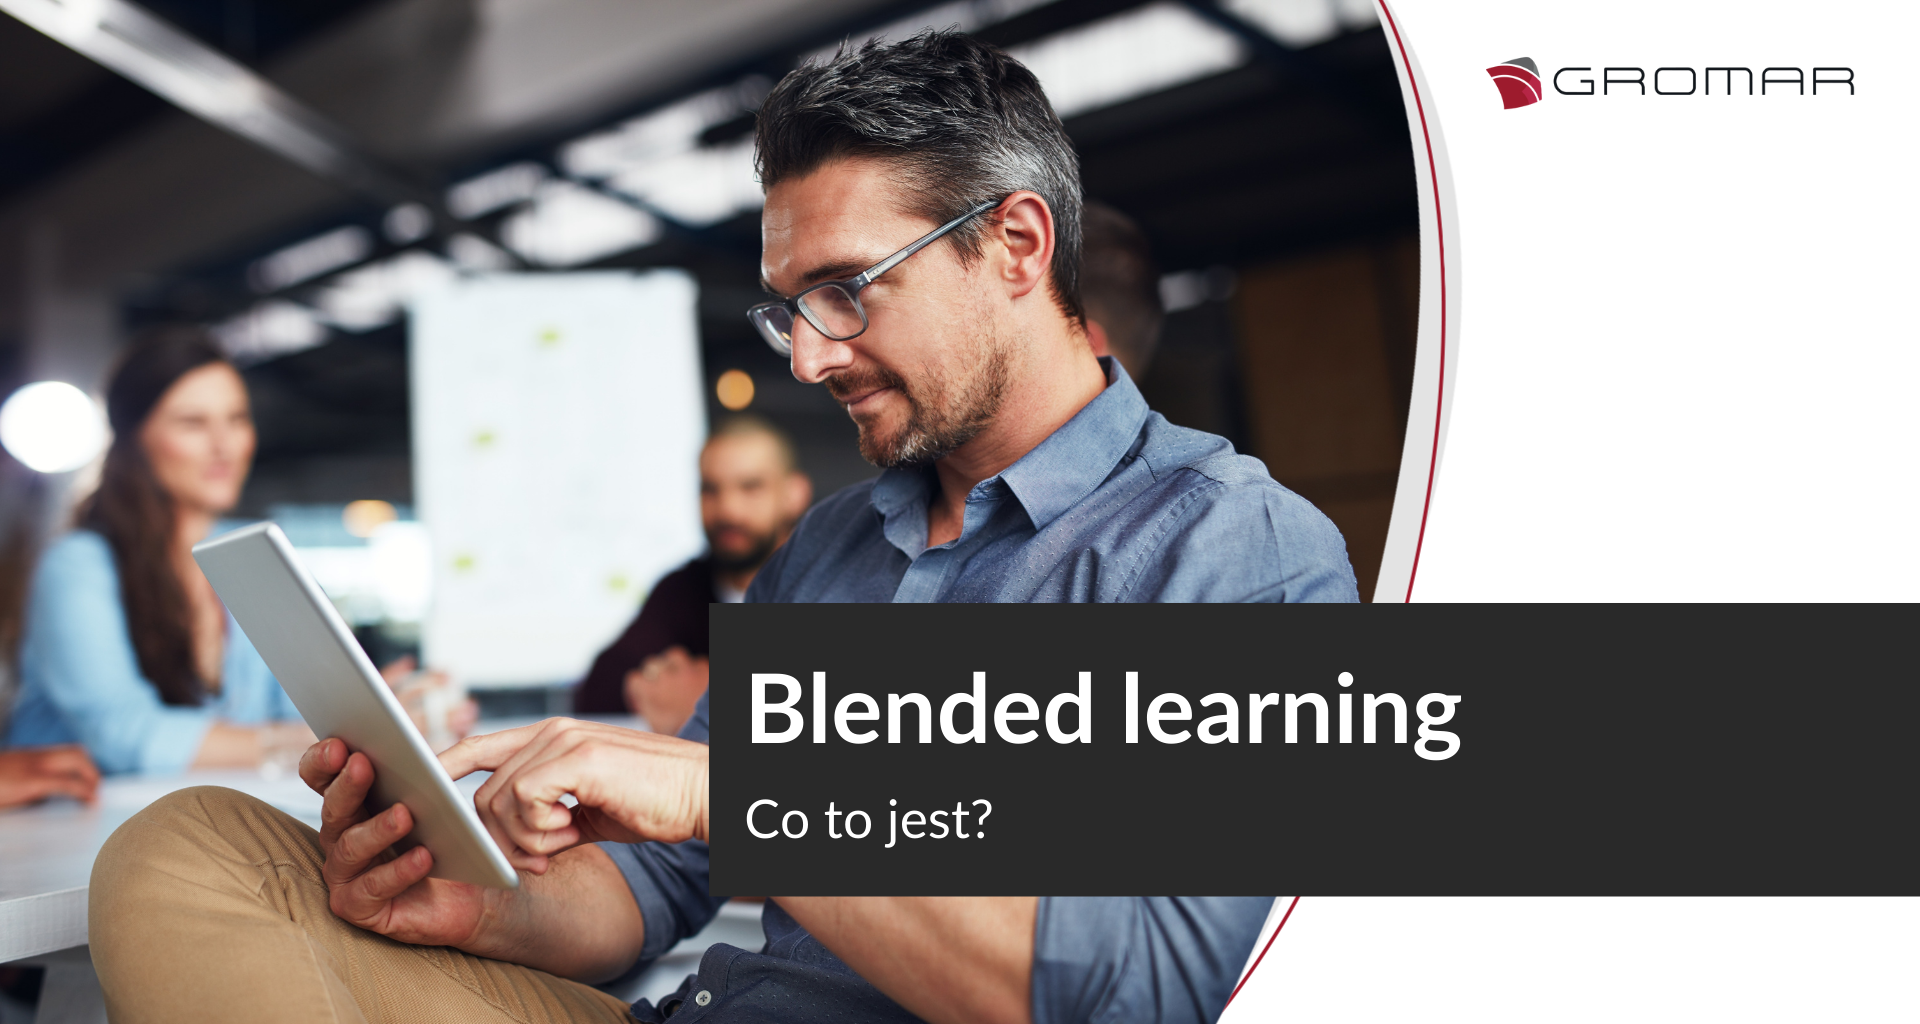 Co to jest blended learning?